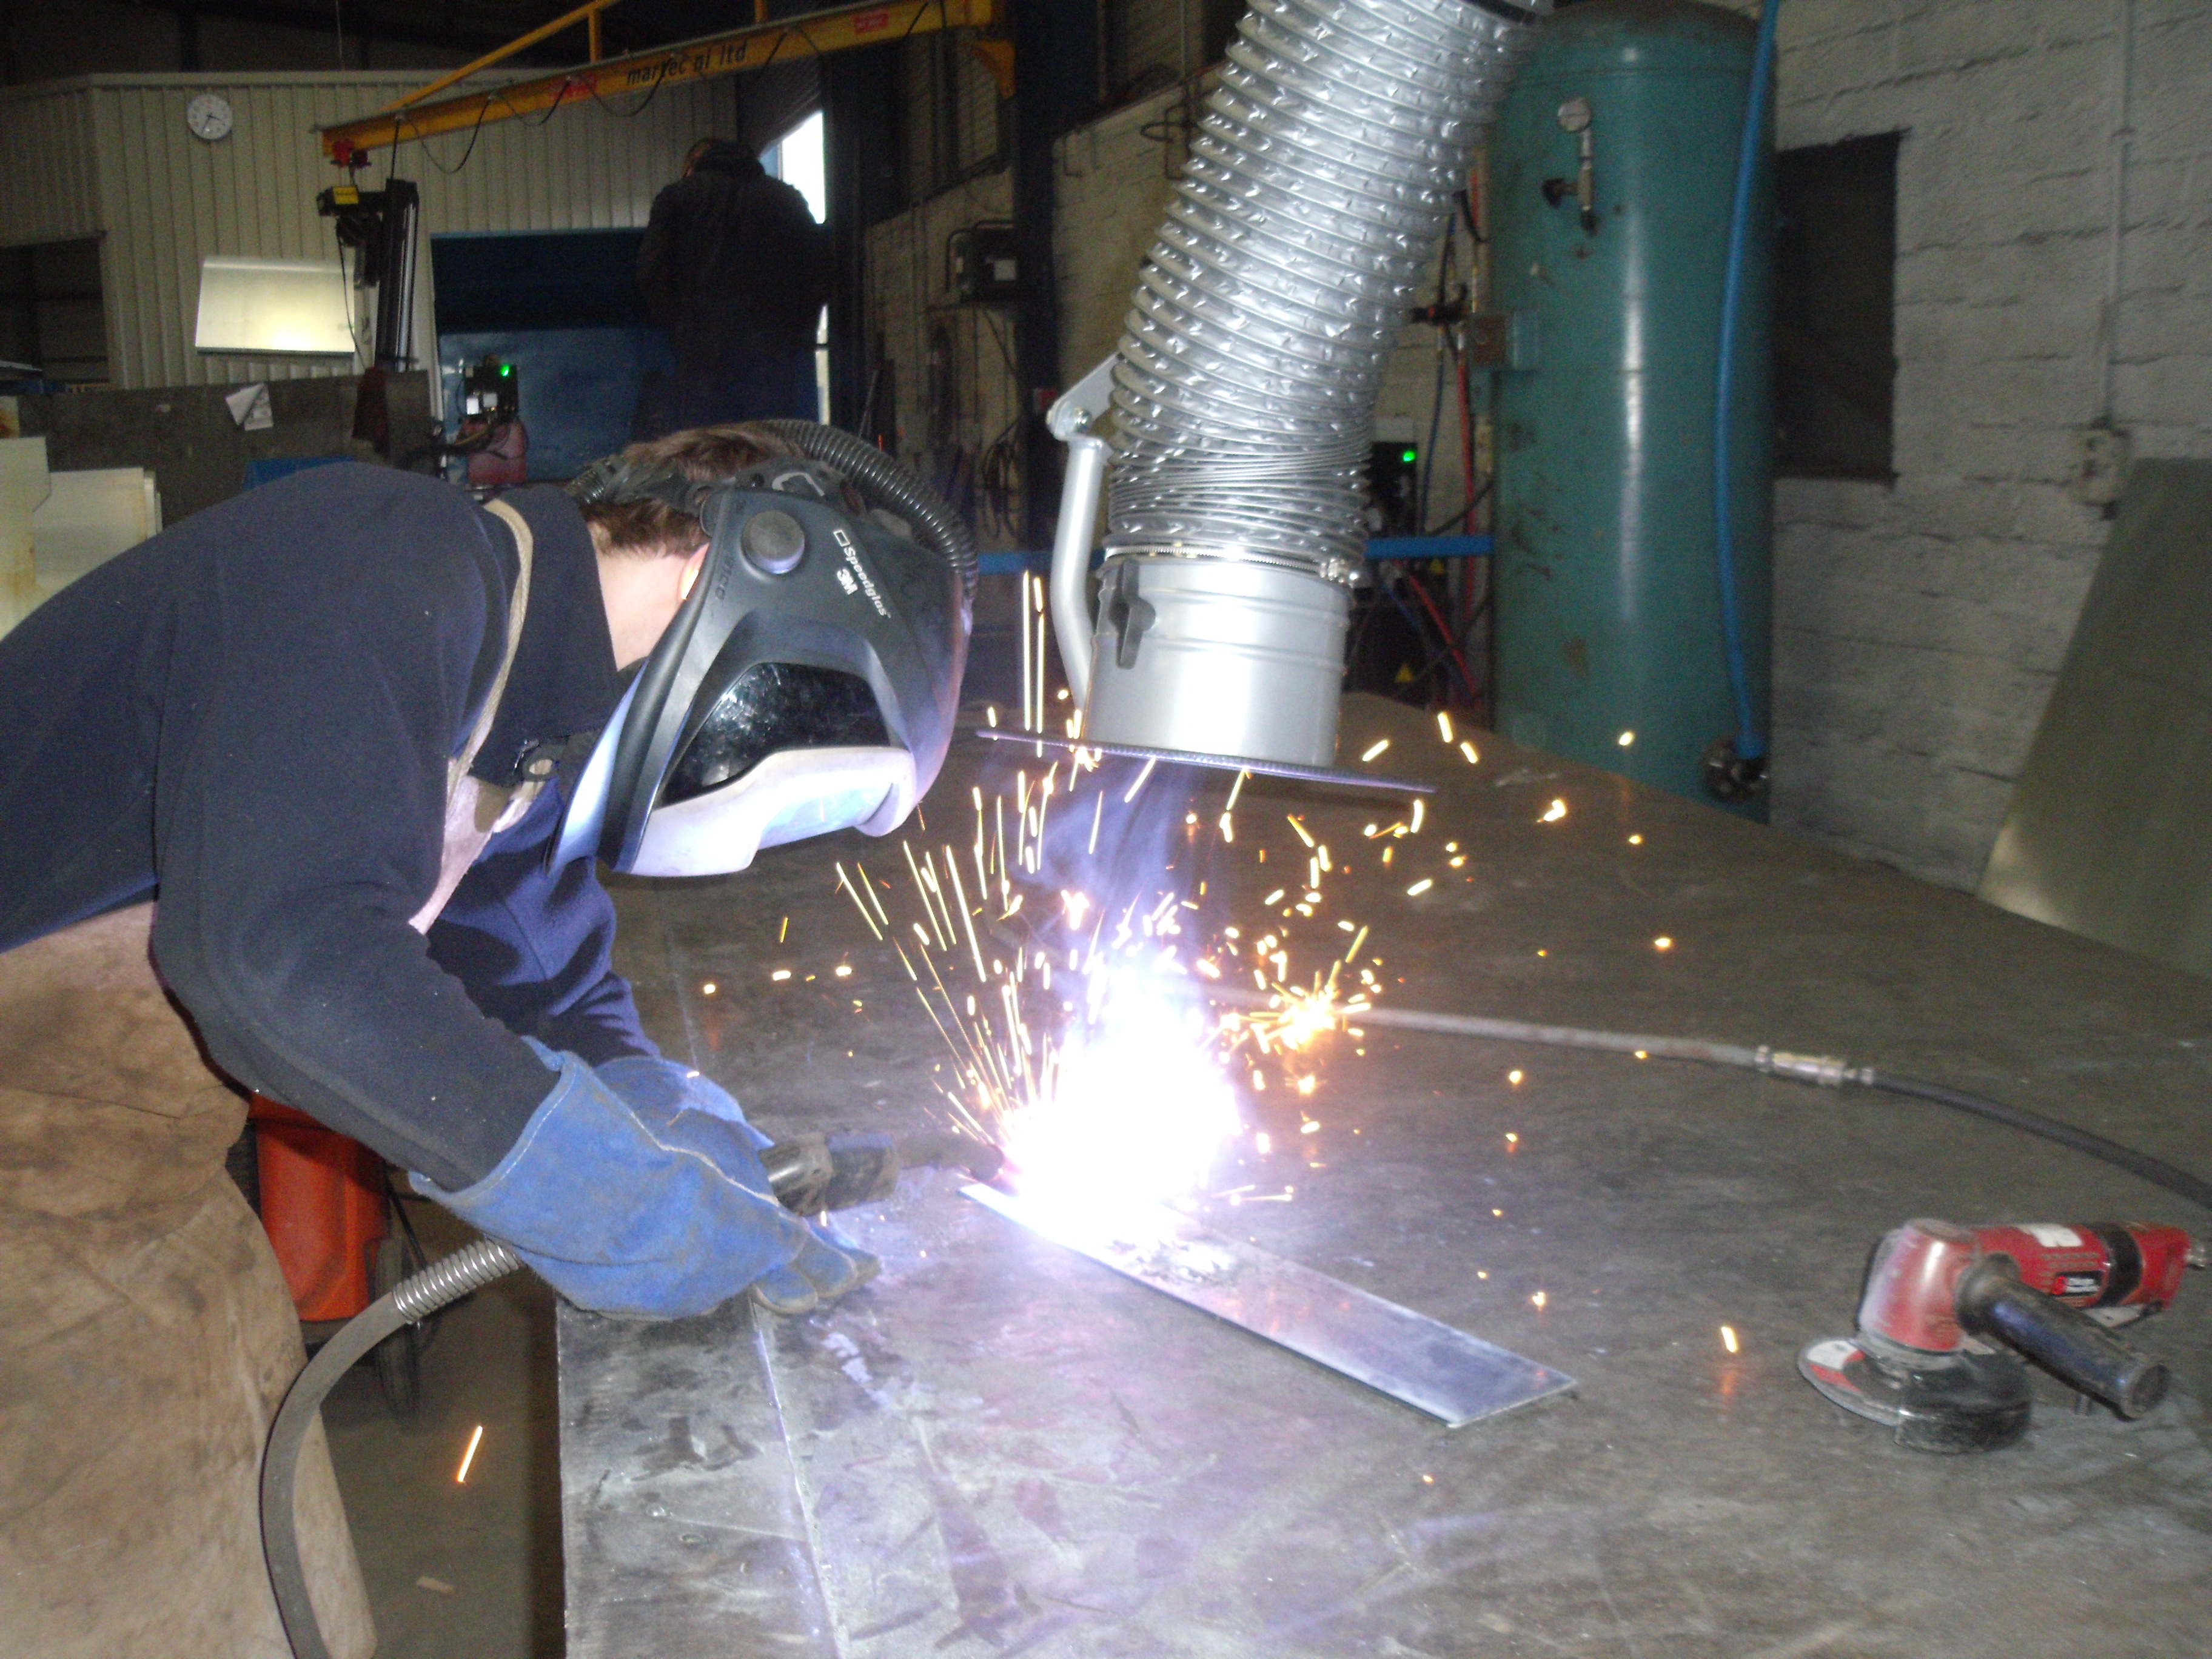 Weld fume extract arm in use by factory worker